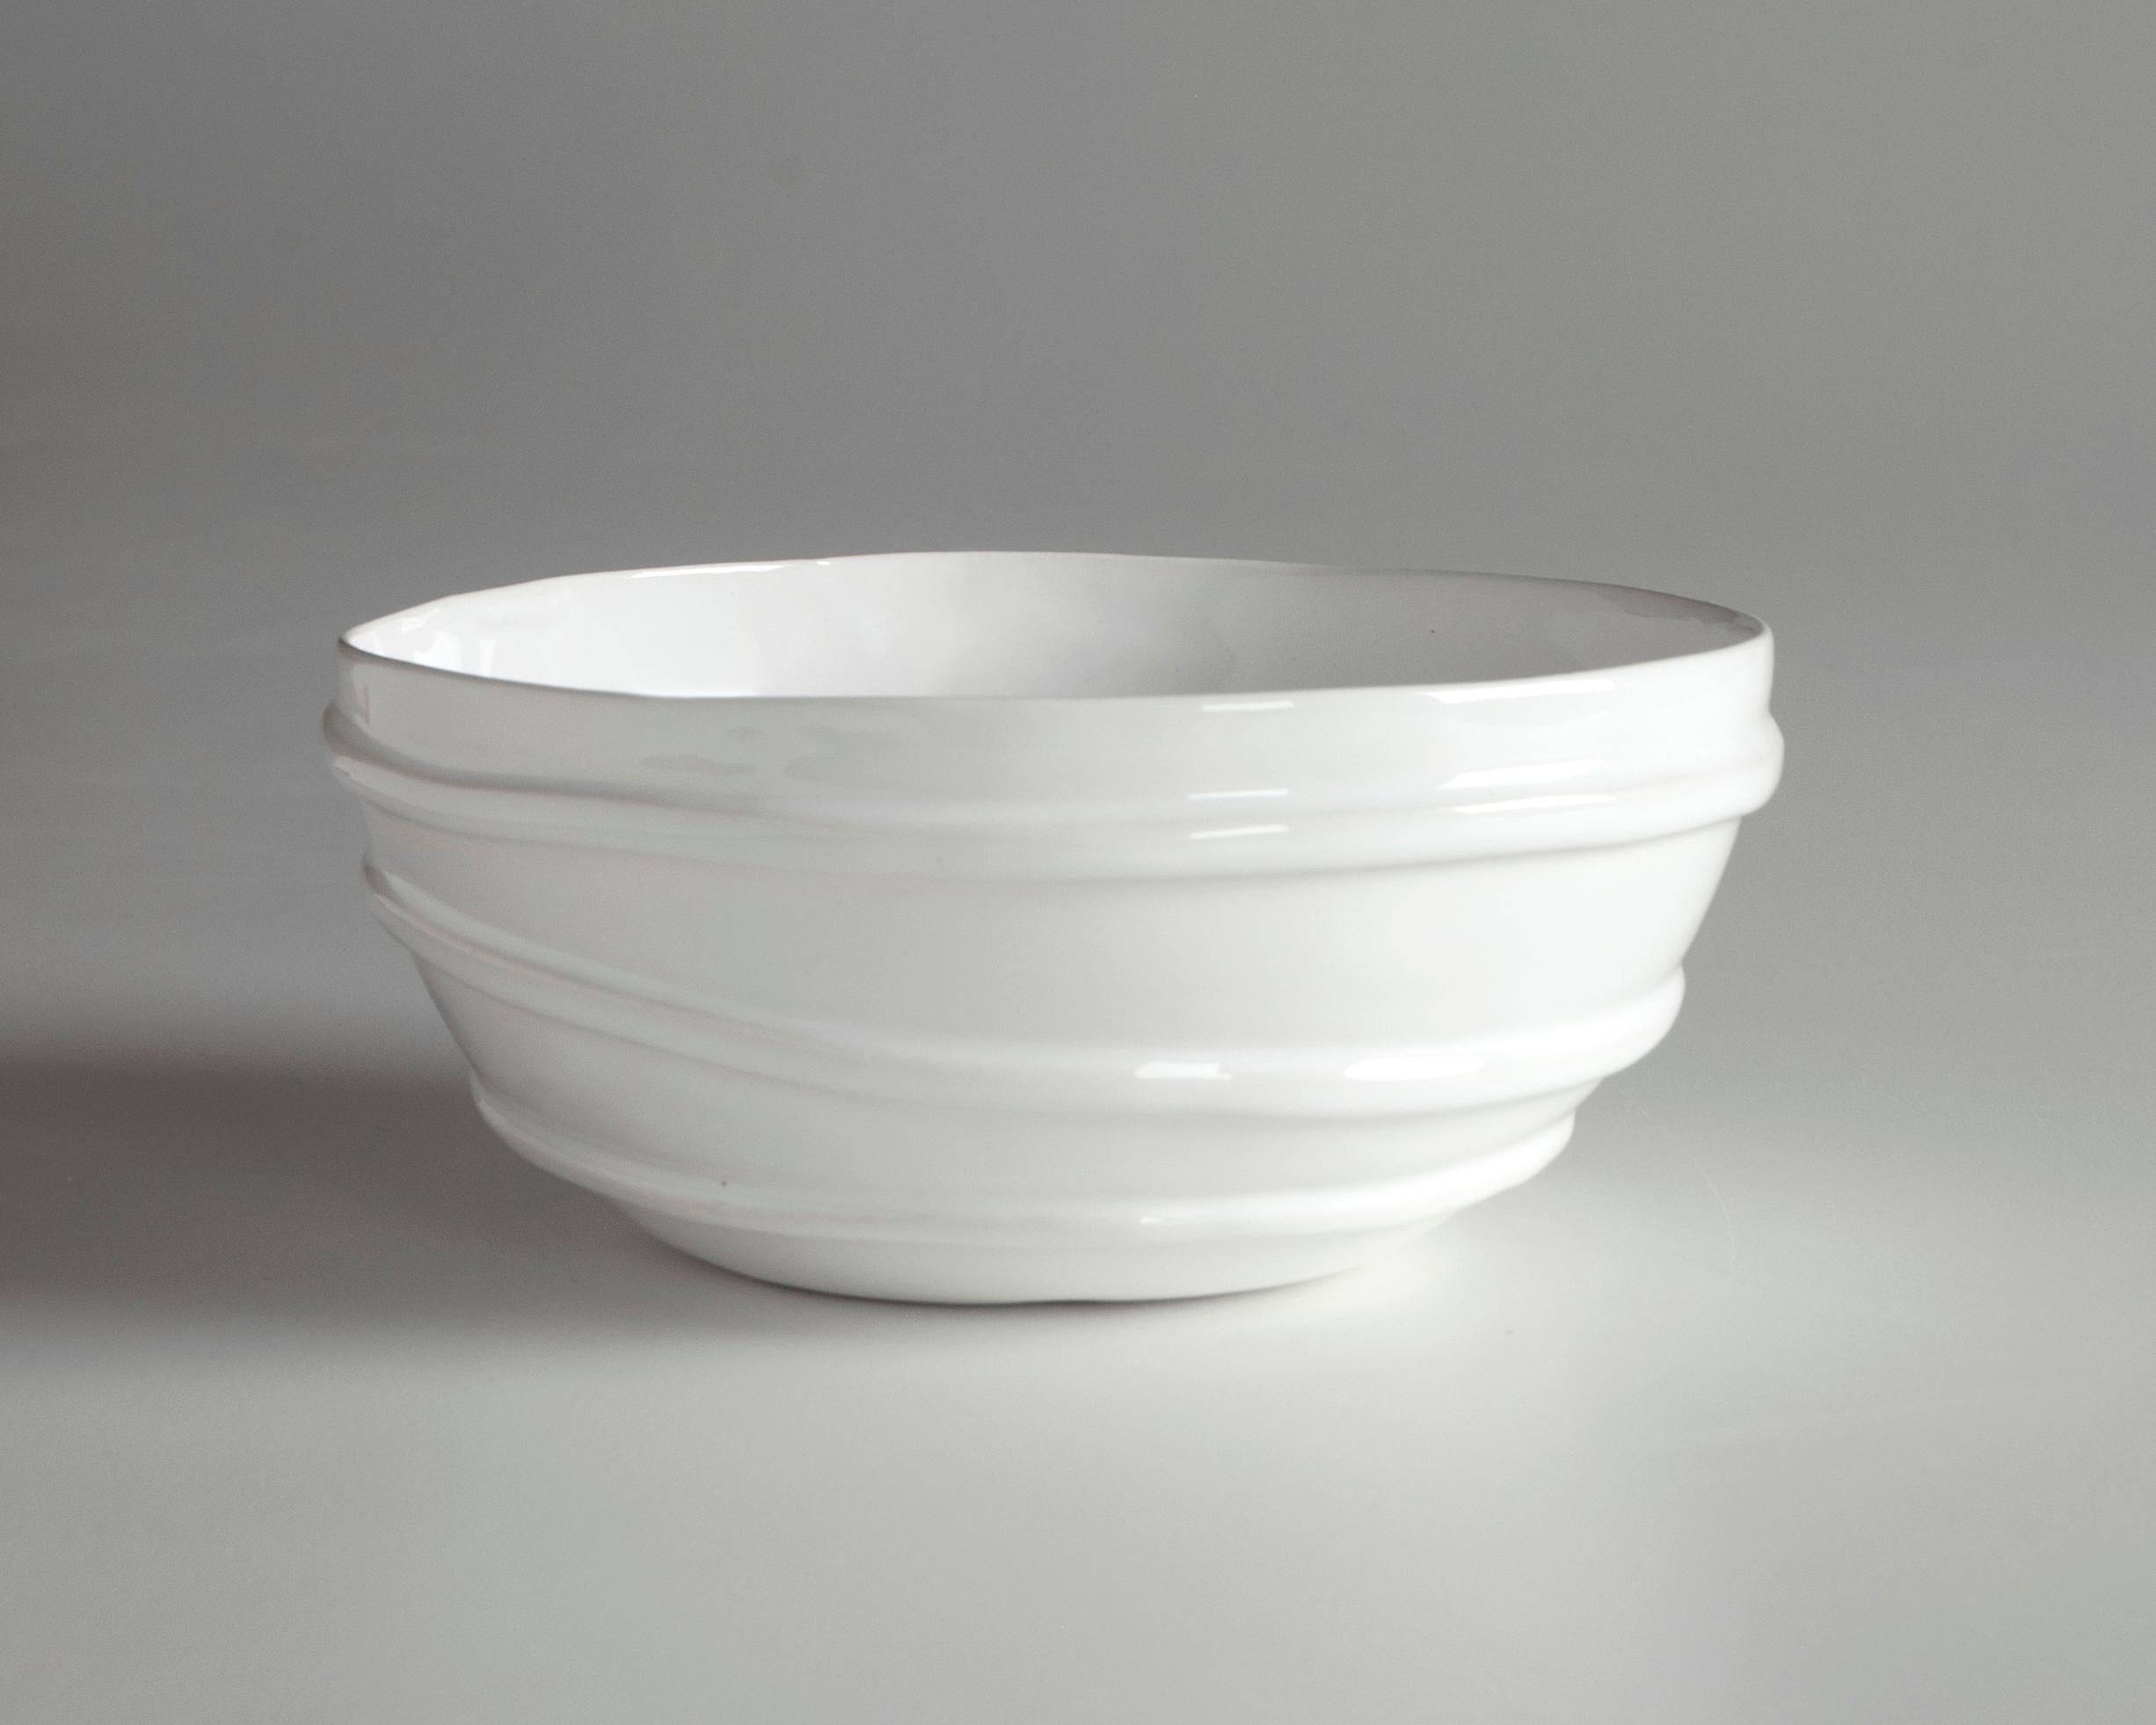 The bowl belongs to a cycle of ceramics called 